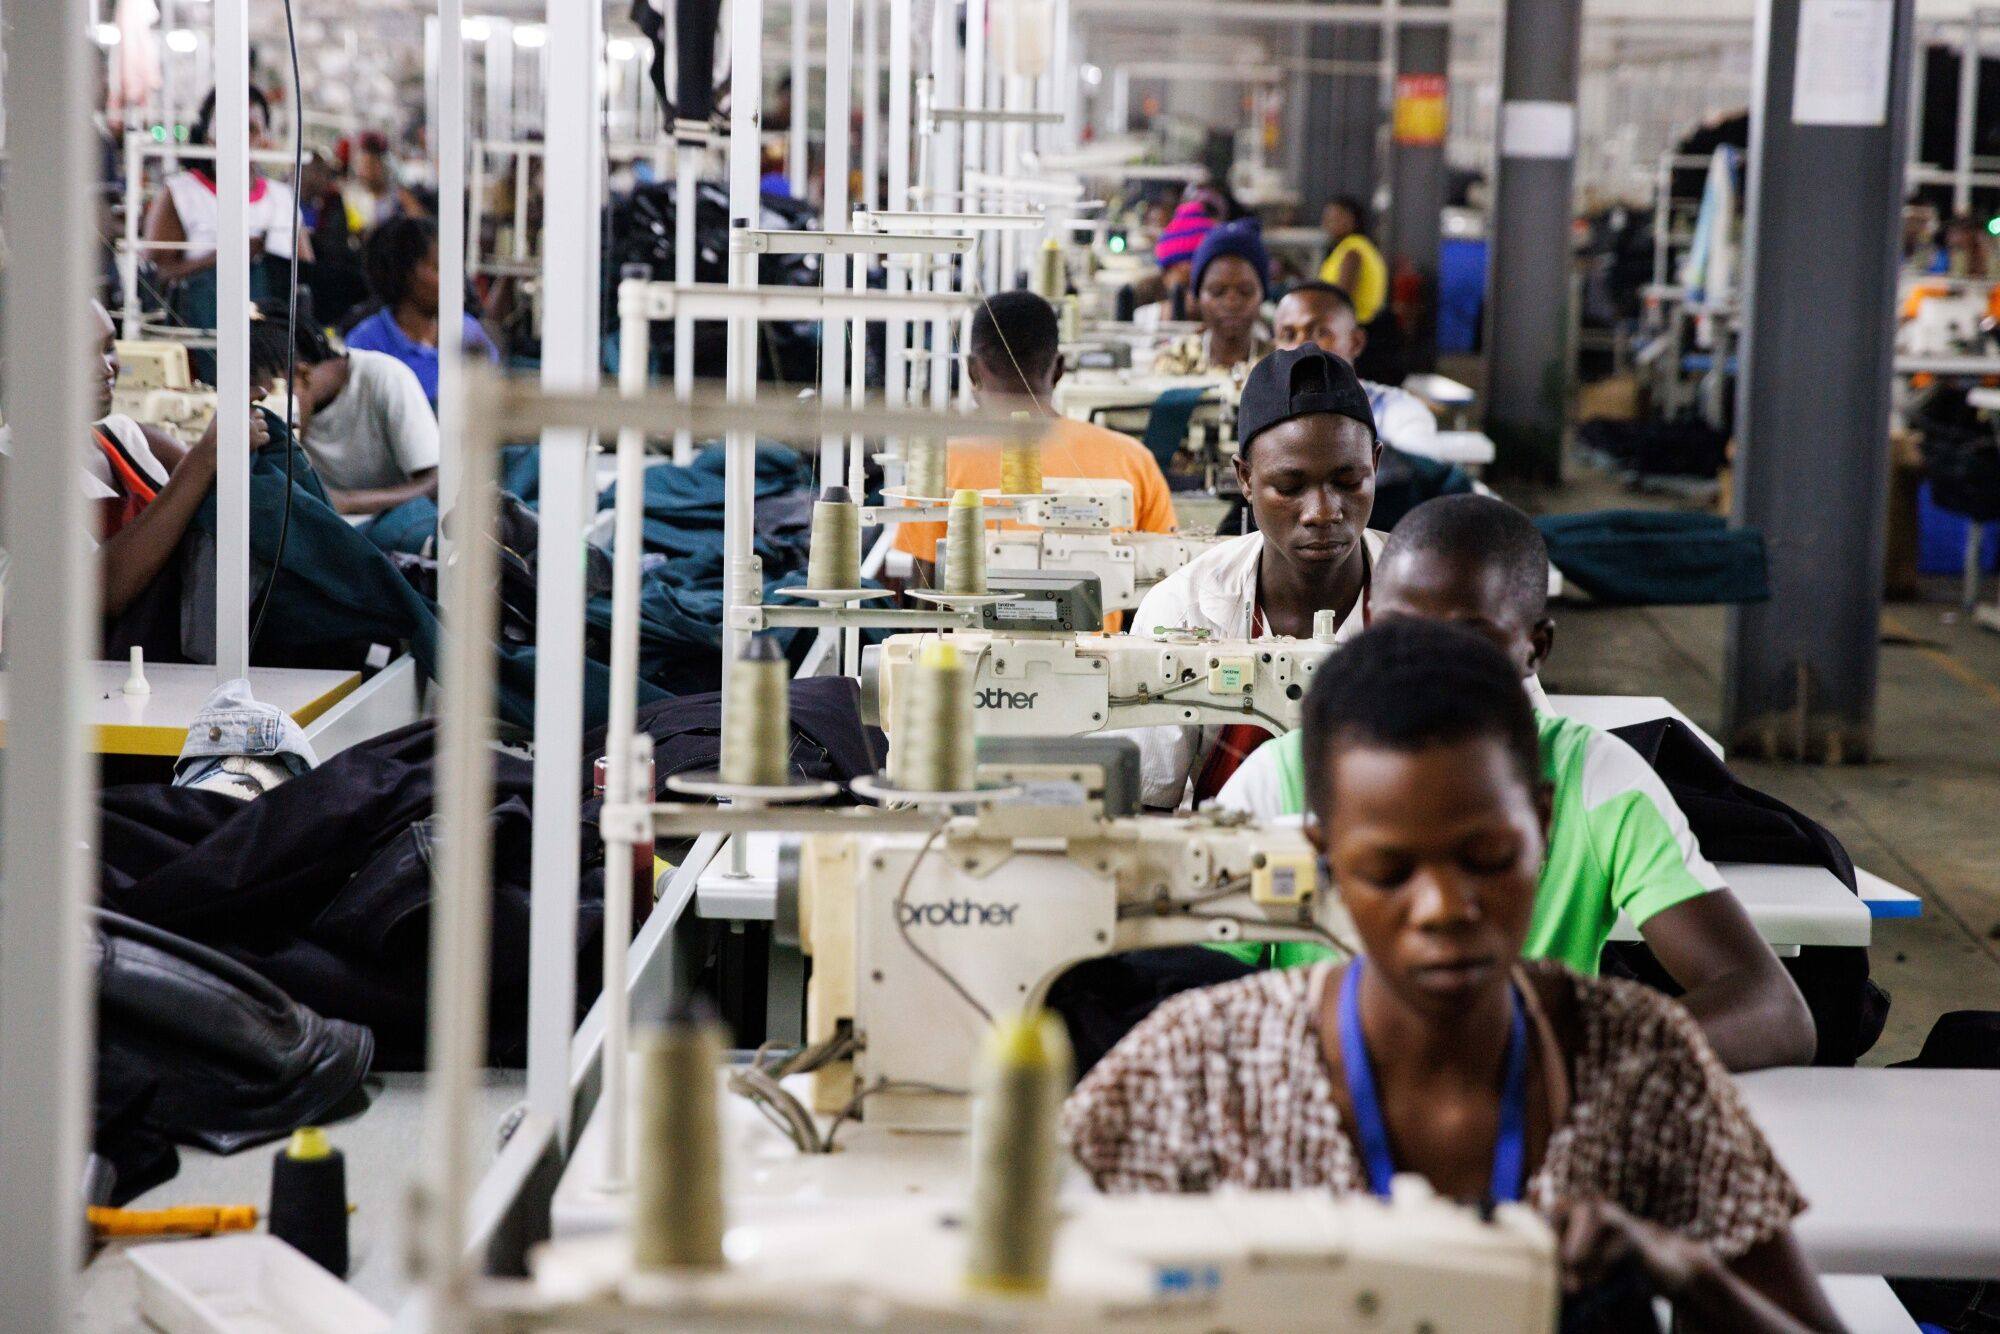 Chinese foreign direct investment in Africa has grown steadily from US$75 million in 2003 to US$5 billion in 2021, according to the China Africa Research Initiative at Johns Hopkins University. Photo: Bloomberg